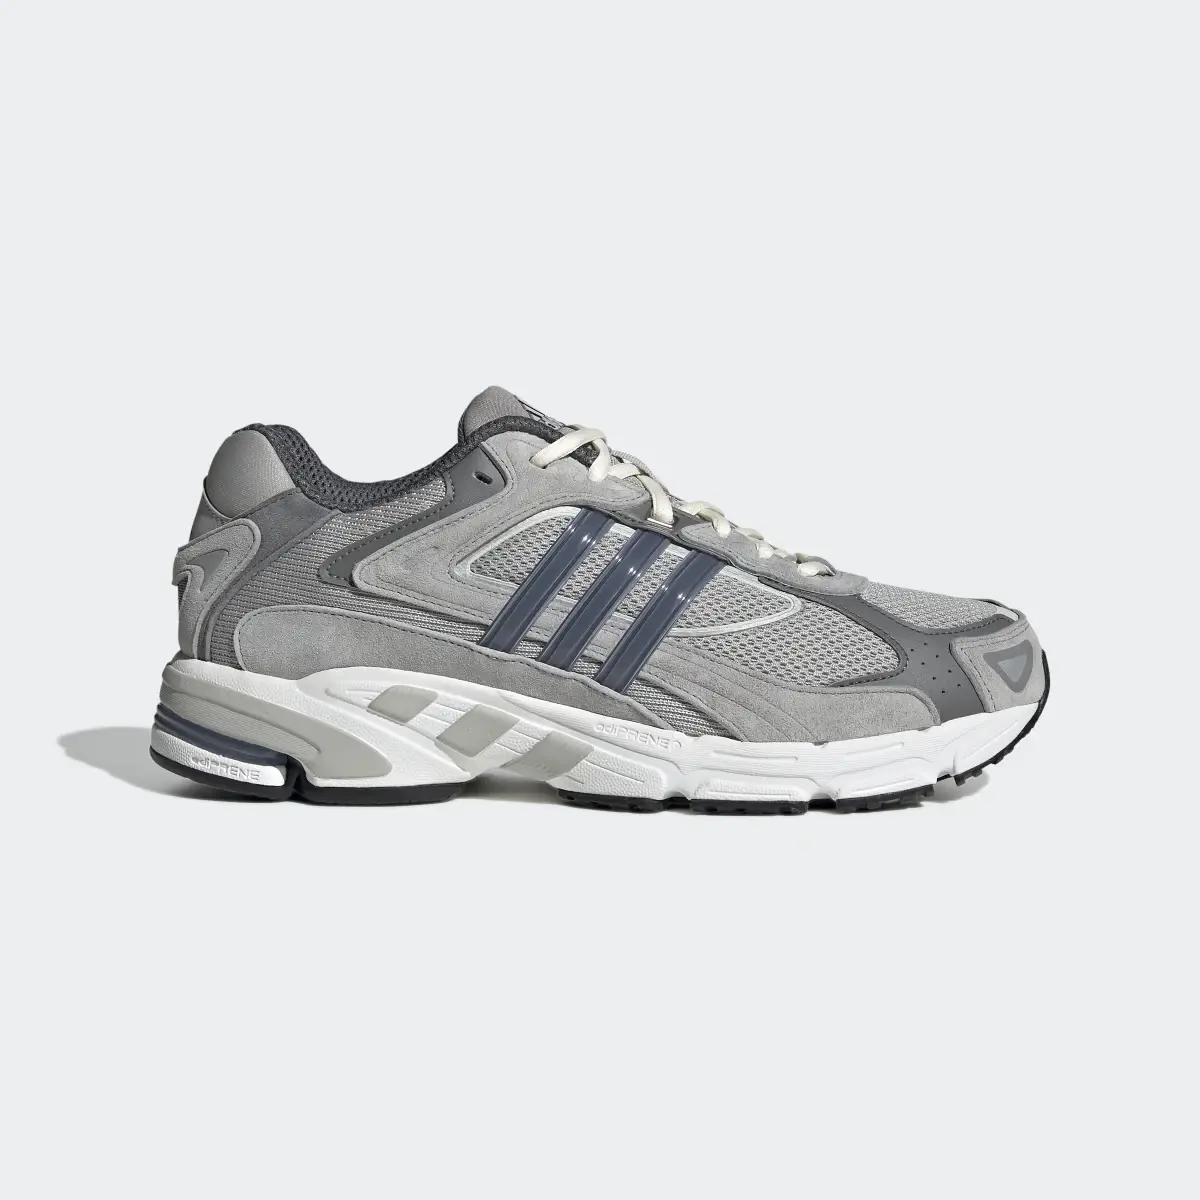 Adidas Response CL Shoes. 2